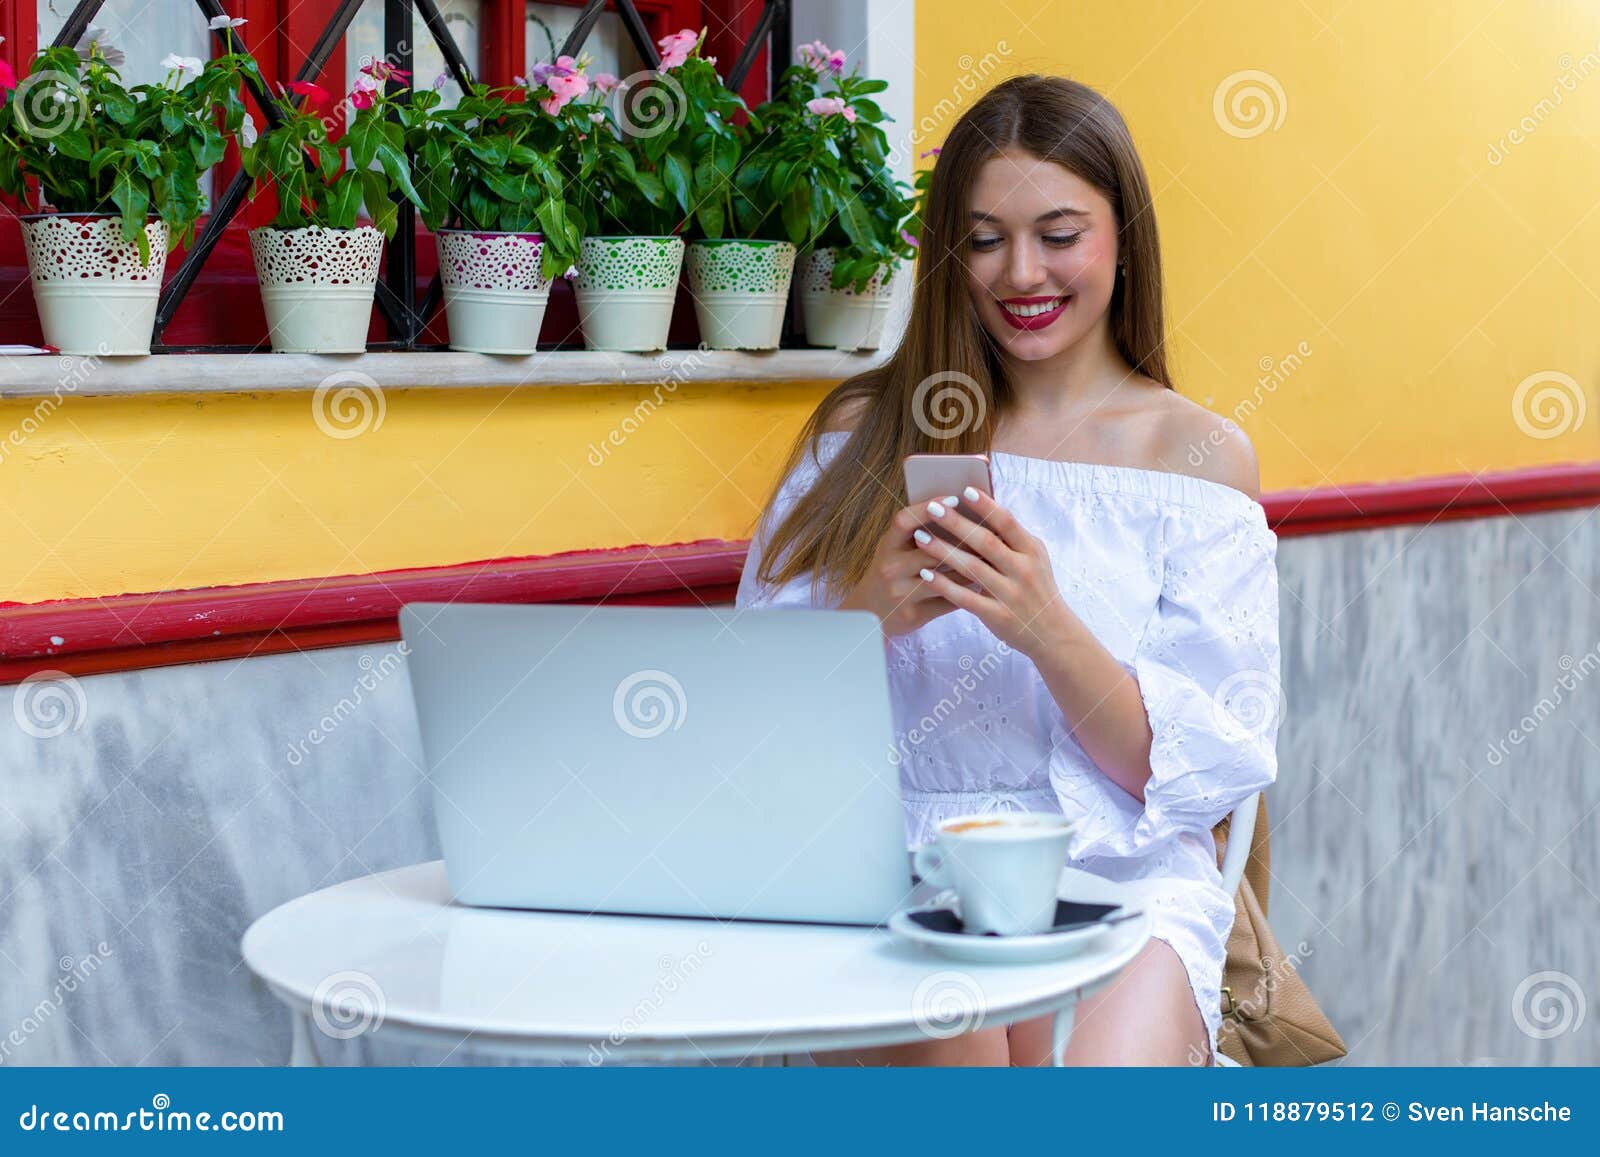 woman sits in a brasserie and works on laptop and smartphone